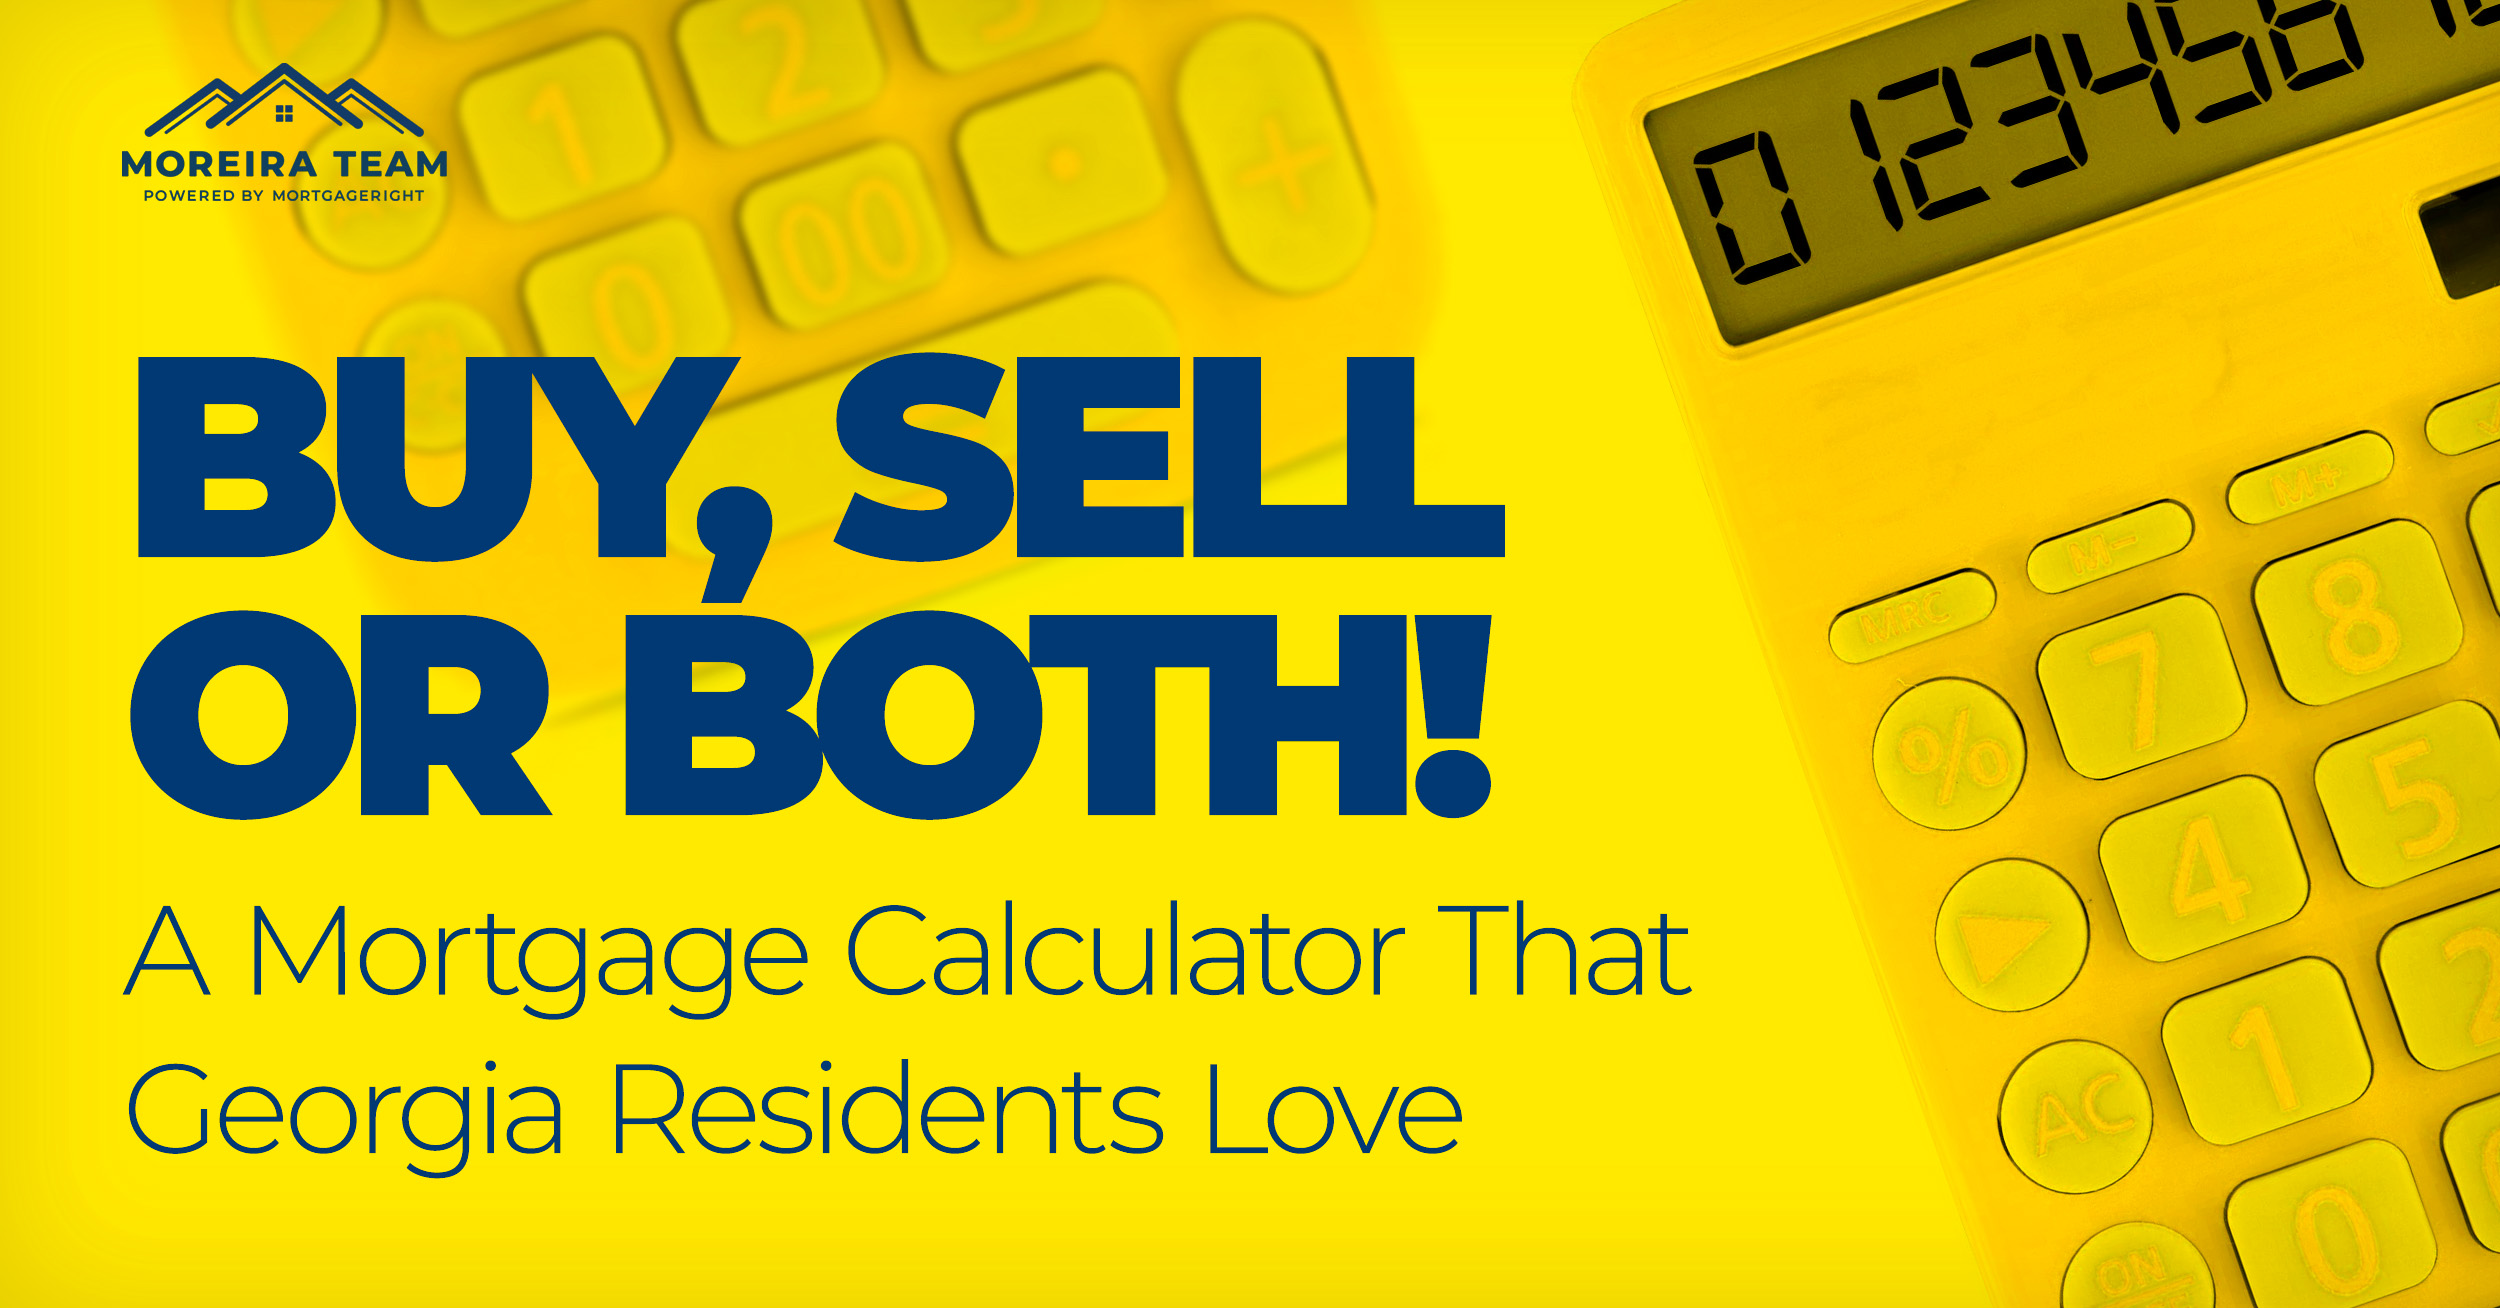 Buy, Sell, or Both: Use the Mortgage Calculator Georgia Residents Love